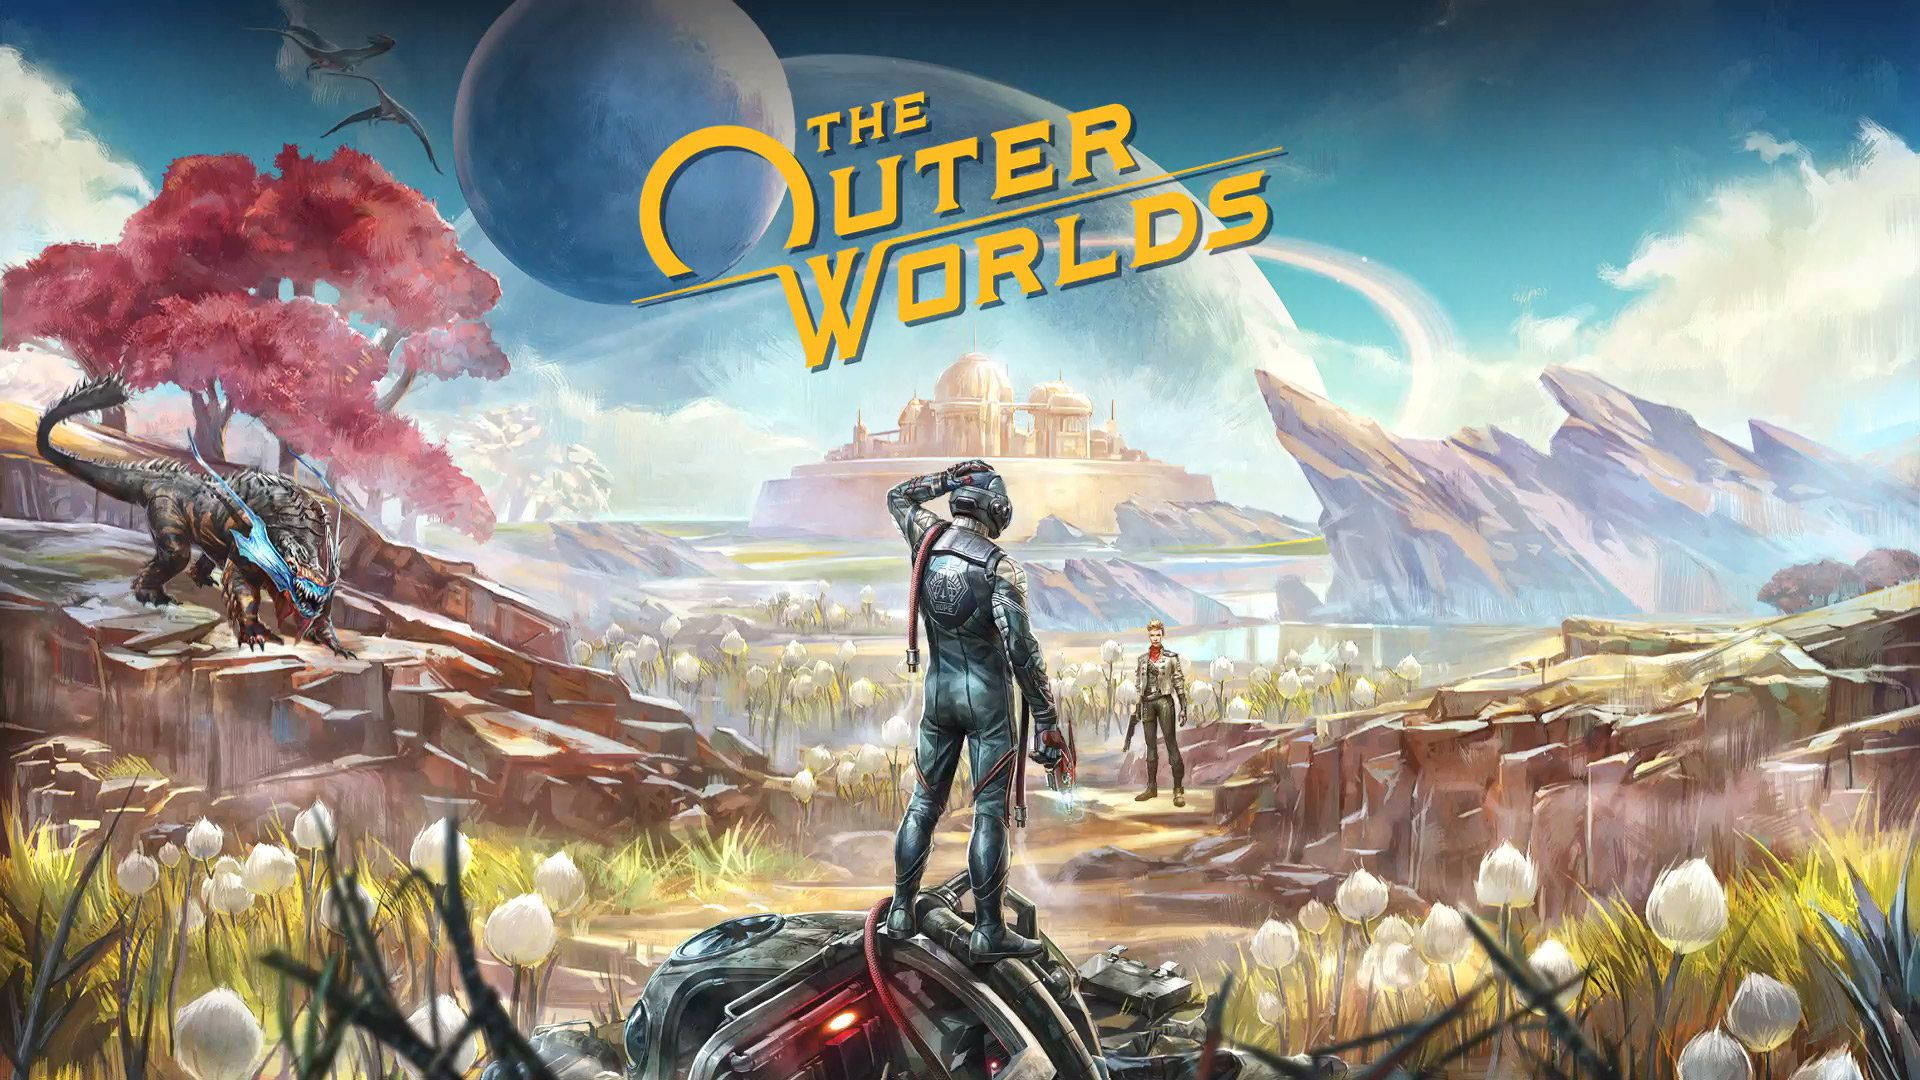 The Outer Worlds Background Wallpaper